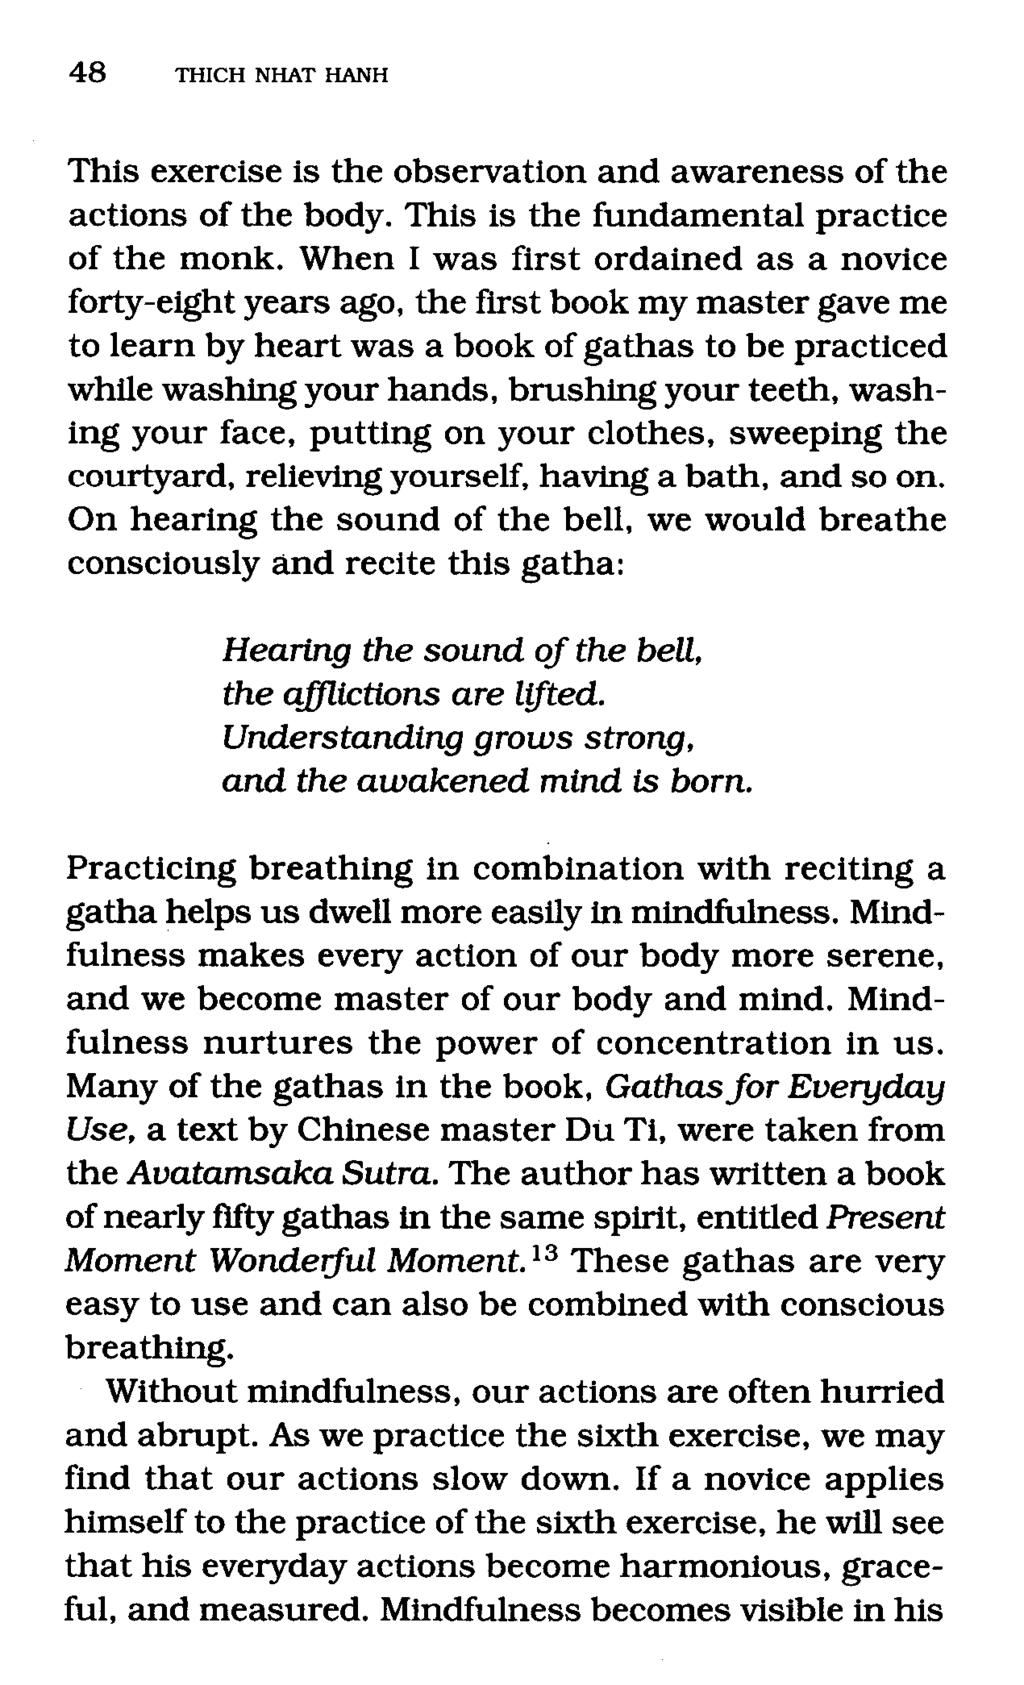 This exercise is the observation and awareness of the actions of the body. This is the fundamental practice of the monk.